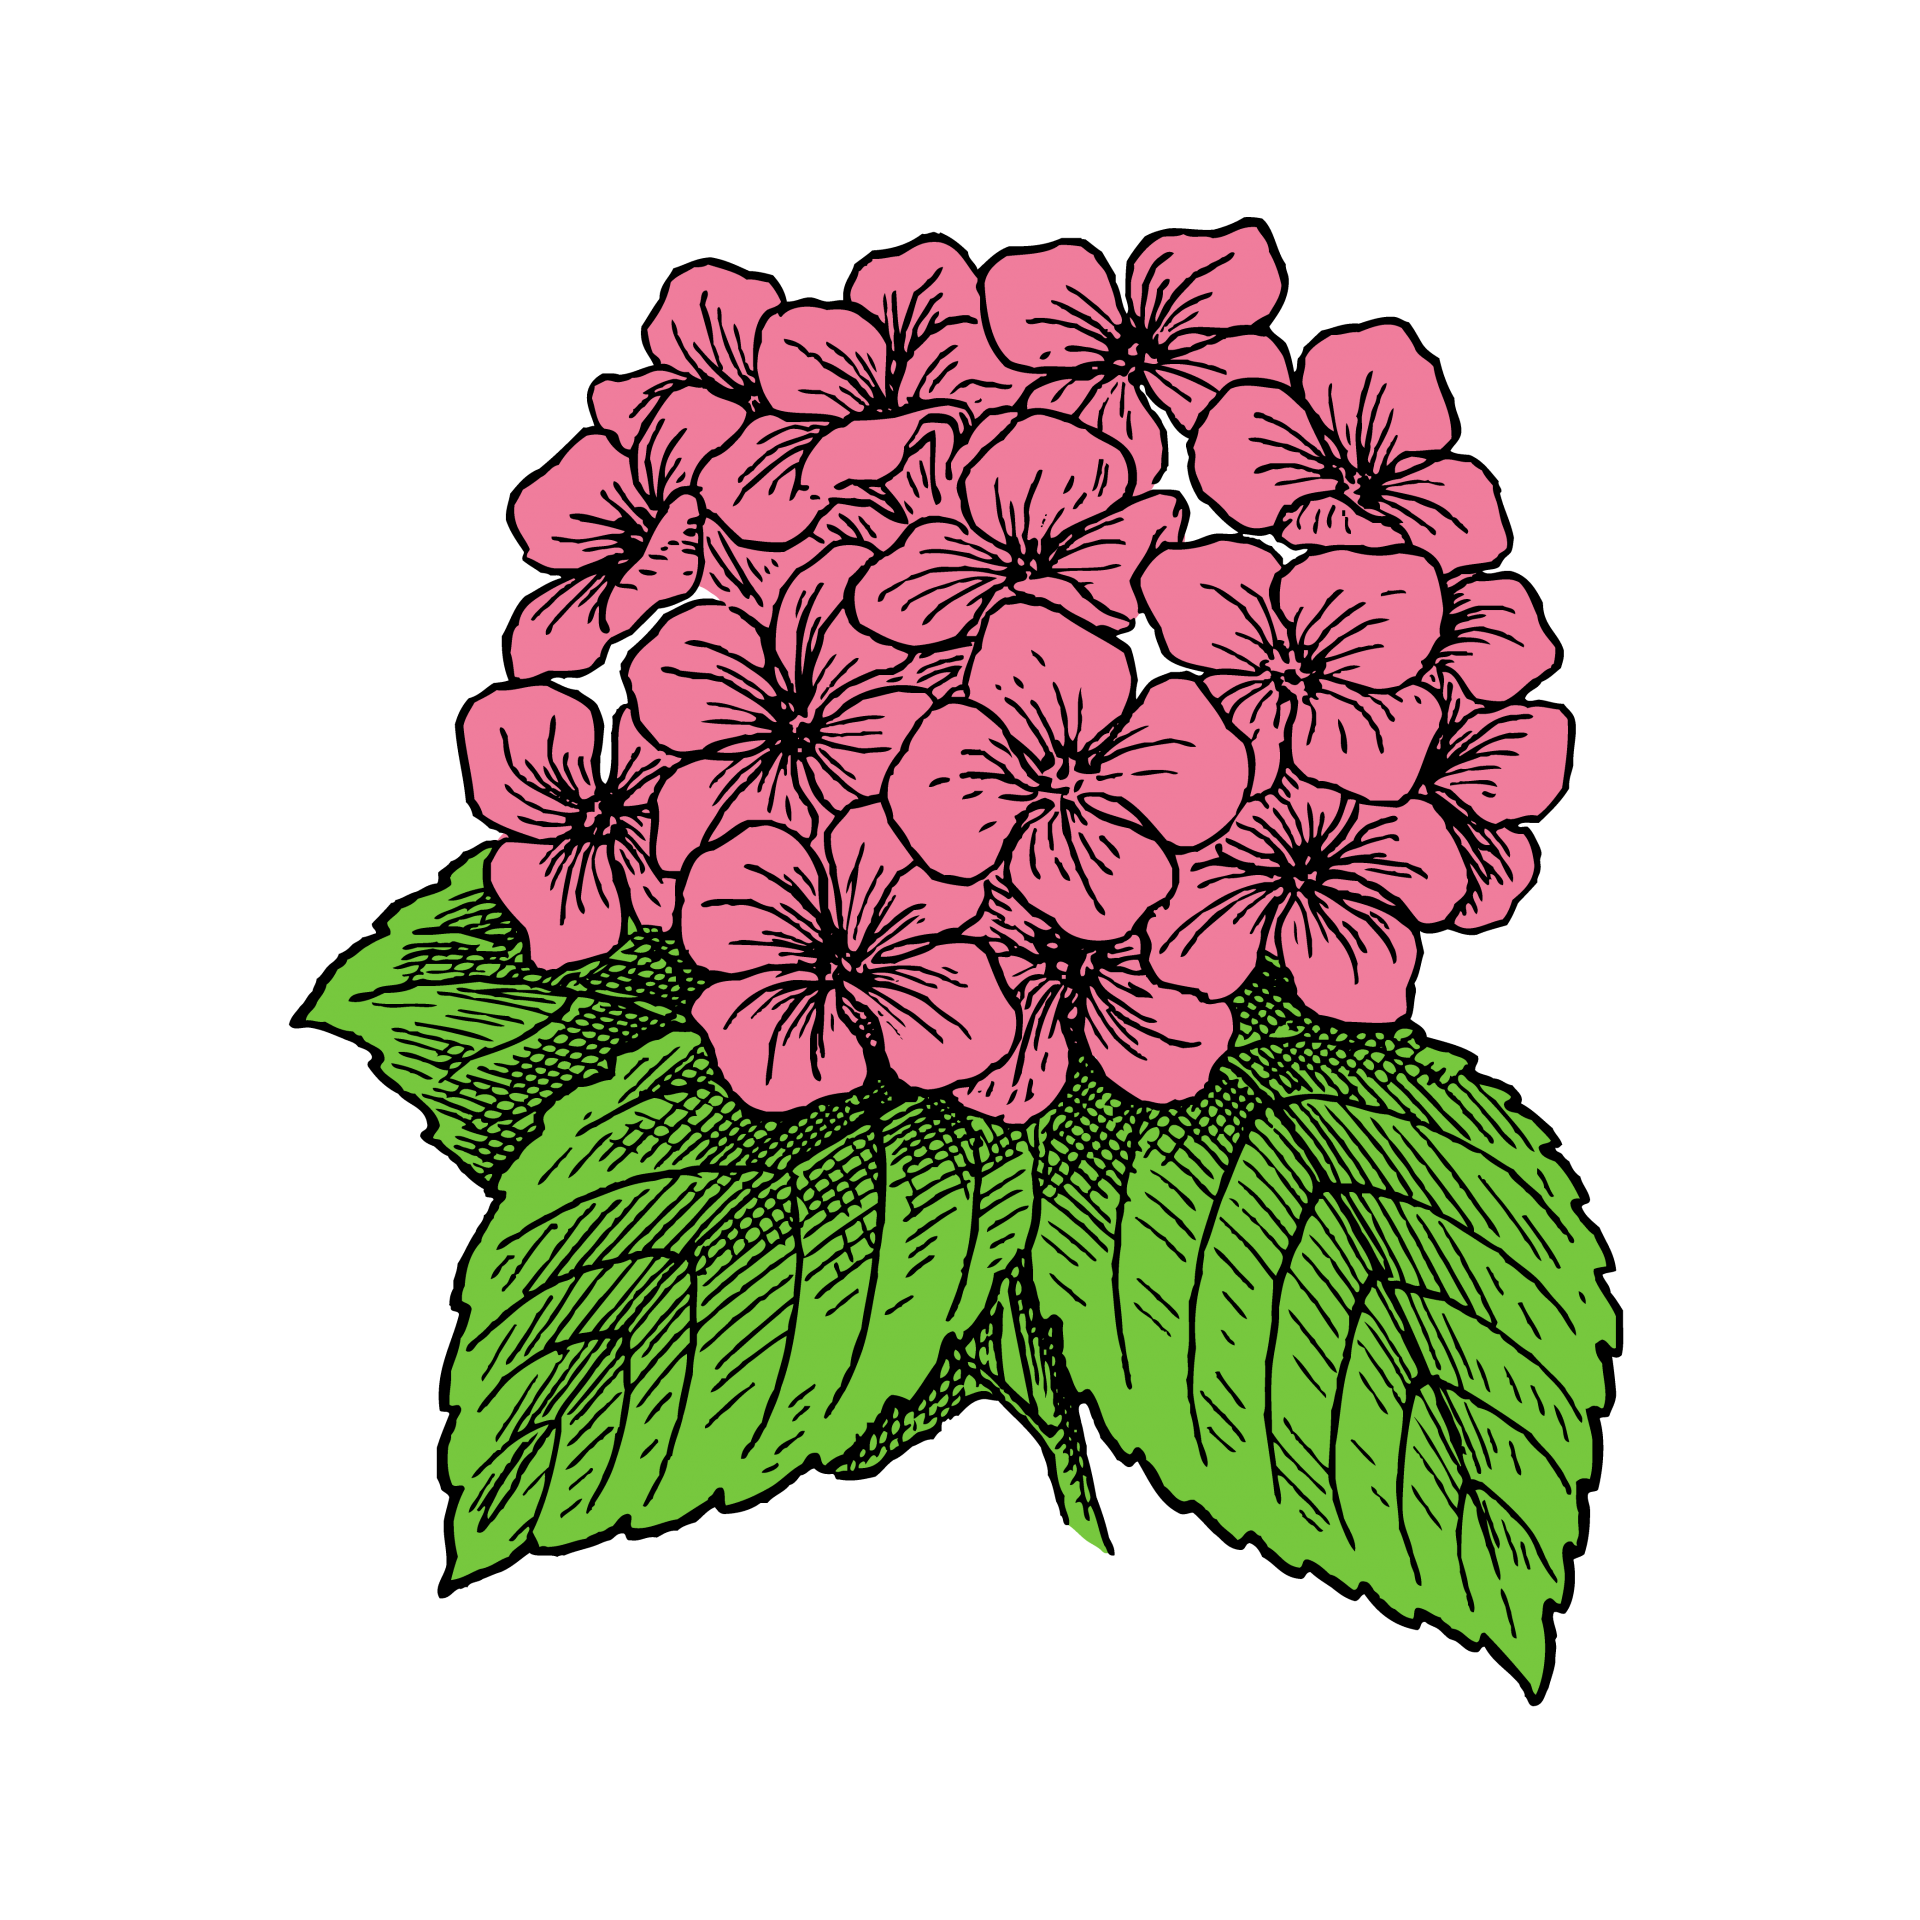 Pink hydrangea flower with green leaves drawing on transparent background